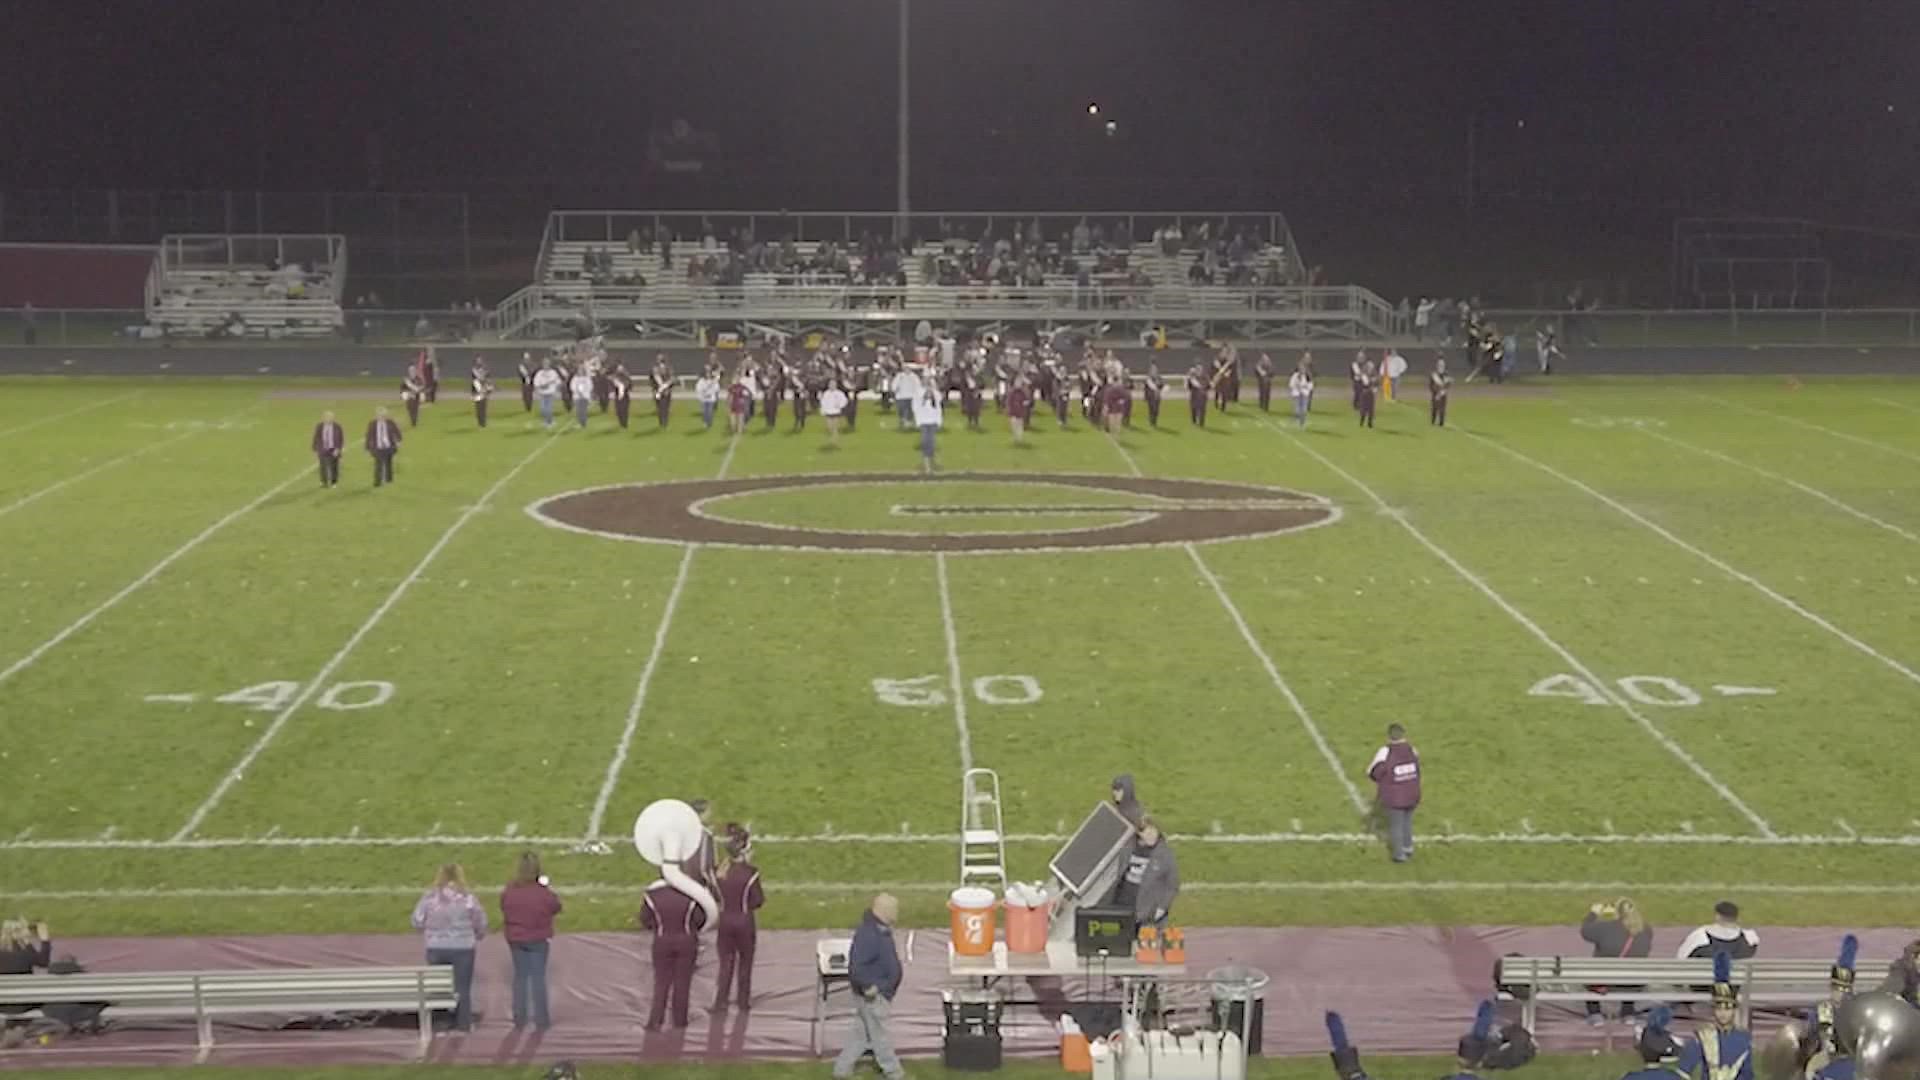 Our final band of the week is the Genoa Comets Marching Band! The Comets Marching Band has over 80 members and here's their full halftime show from Oct. 22!